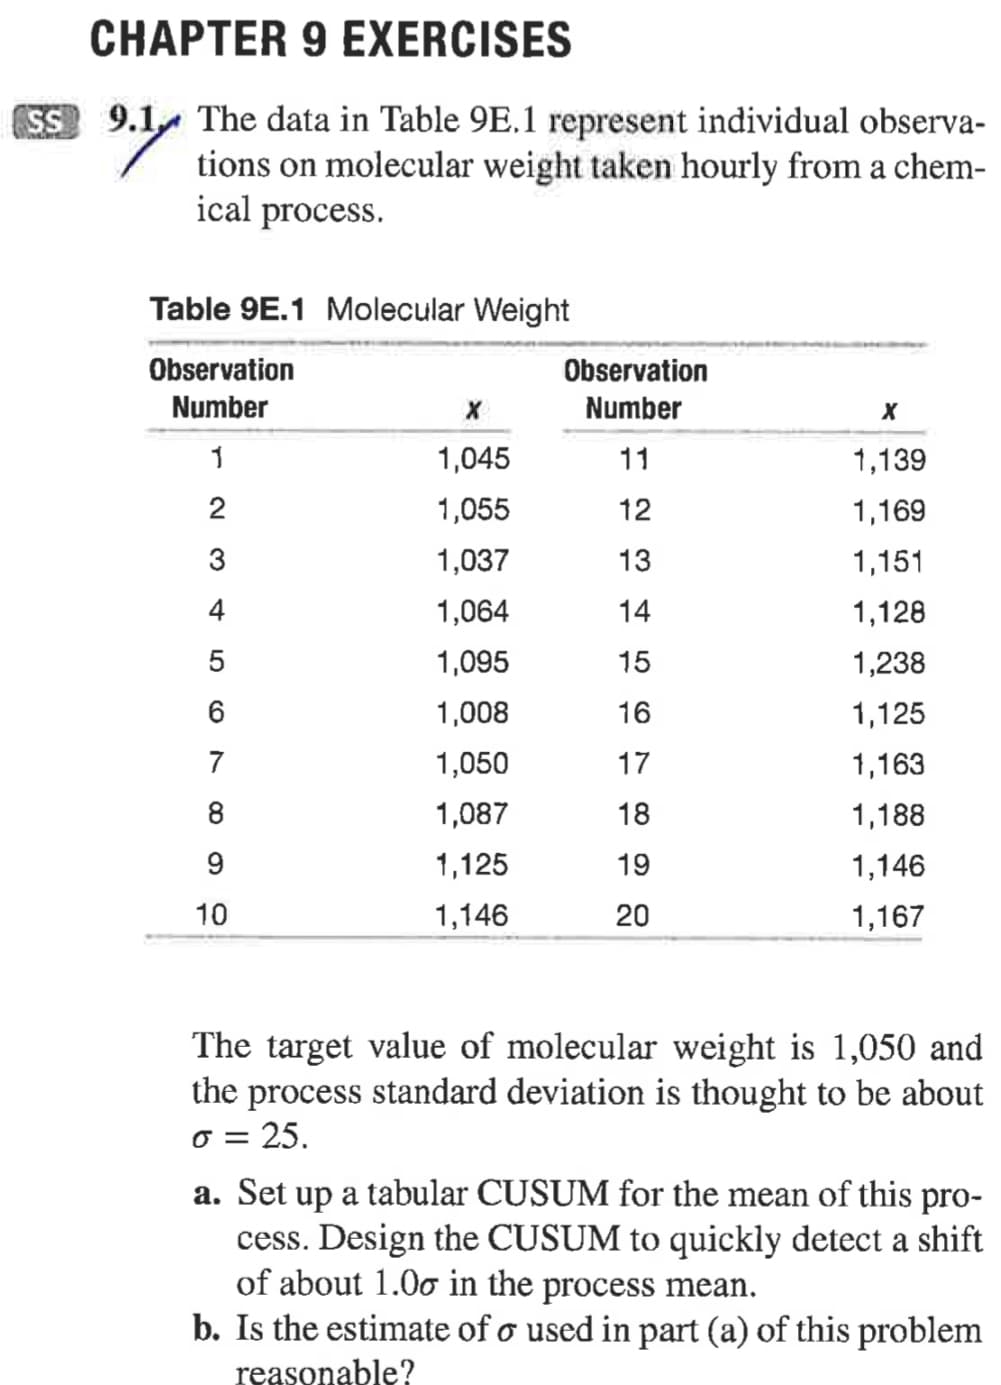 CHAPTER 9 EXERCISES
(SS
9.17
The data in Table 9E.1 represent individual observa-
ical process.
Table 9E.1 Molecular Weight
a
Observation
Observation
Number
X
Number
X
1
1,045
11
1,139
2
1,055
12
1,169
34
3
1,037
13
1,151
1,064
14
1,128
5
1,095
15
1,238
6
1,008
16
1,125
7
1,050
17
1,163
8
1,087
18
1,188
9
1,125
19
1,146
10
1,146
20
1,167
The target value of molecular weight is 1,050 and
the process standard deviation is thought to be about
σ = 25.
a. Set up a tabular CUSUM for the mean of this pro-
cess. Design the CUSUM to quickly detect a shift
of about 1.00 in the process mean.
b. Is the estimate of σ used in part (a) of this problem
reasonable?